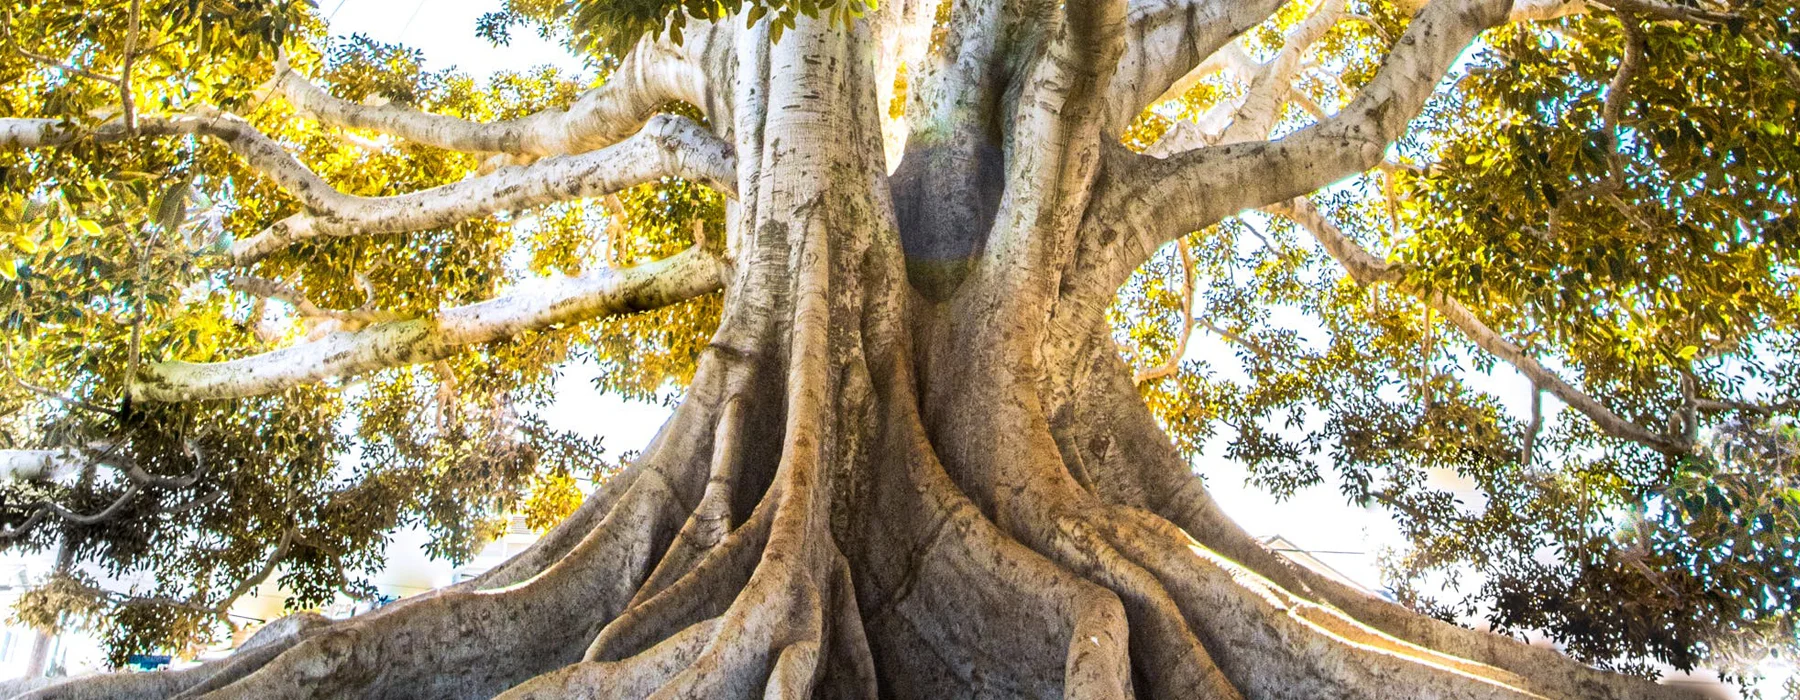 A large tree viewed from the ground showing the intricate strength of its root system and large branches.